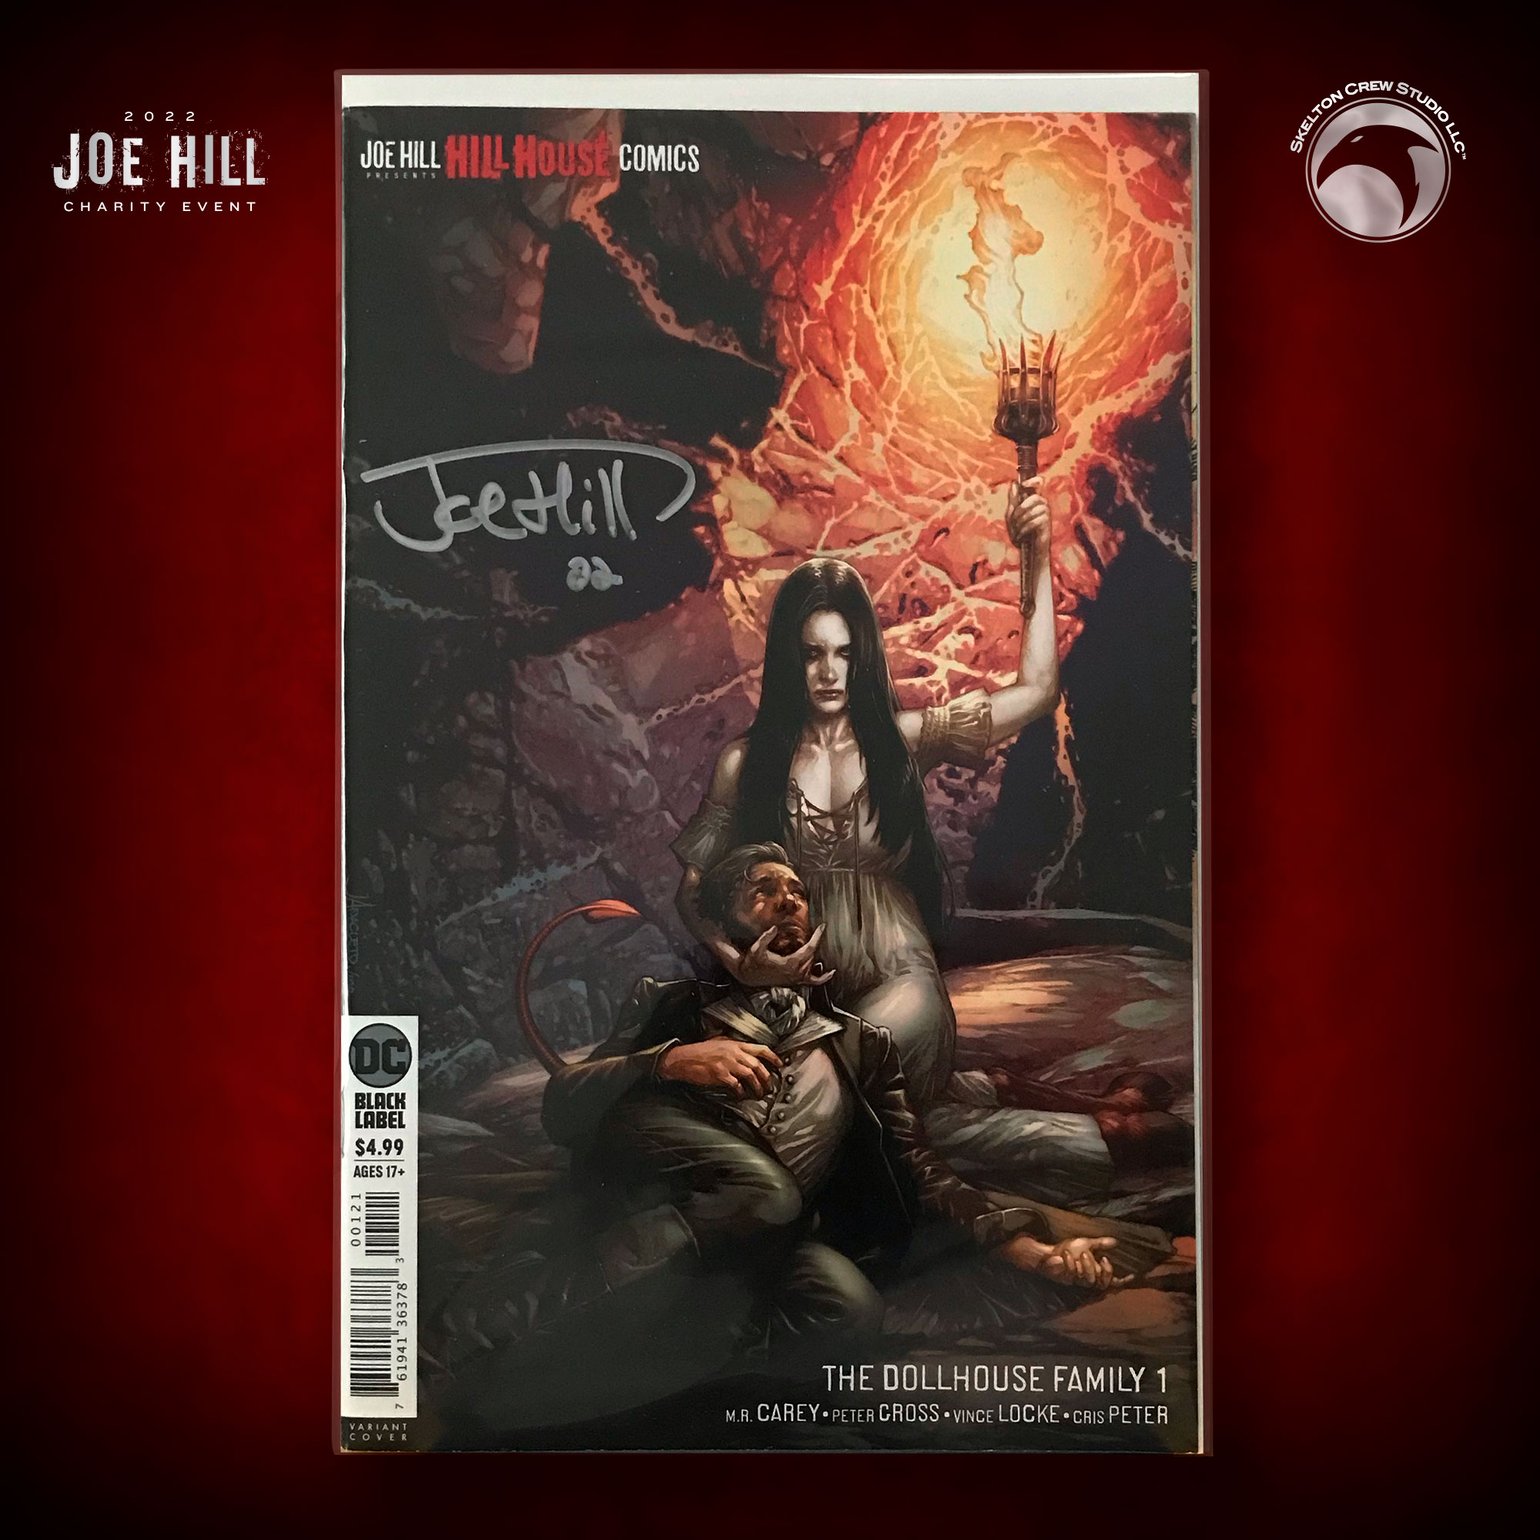 Image of JOE HILL 2022 CHARITY EVENT 24: SIGNED "The Dollhouse Family" #1 alternate cover